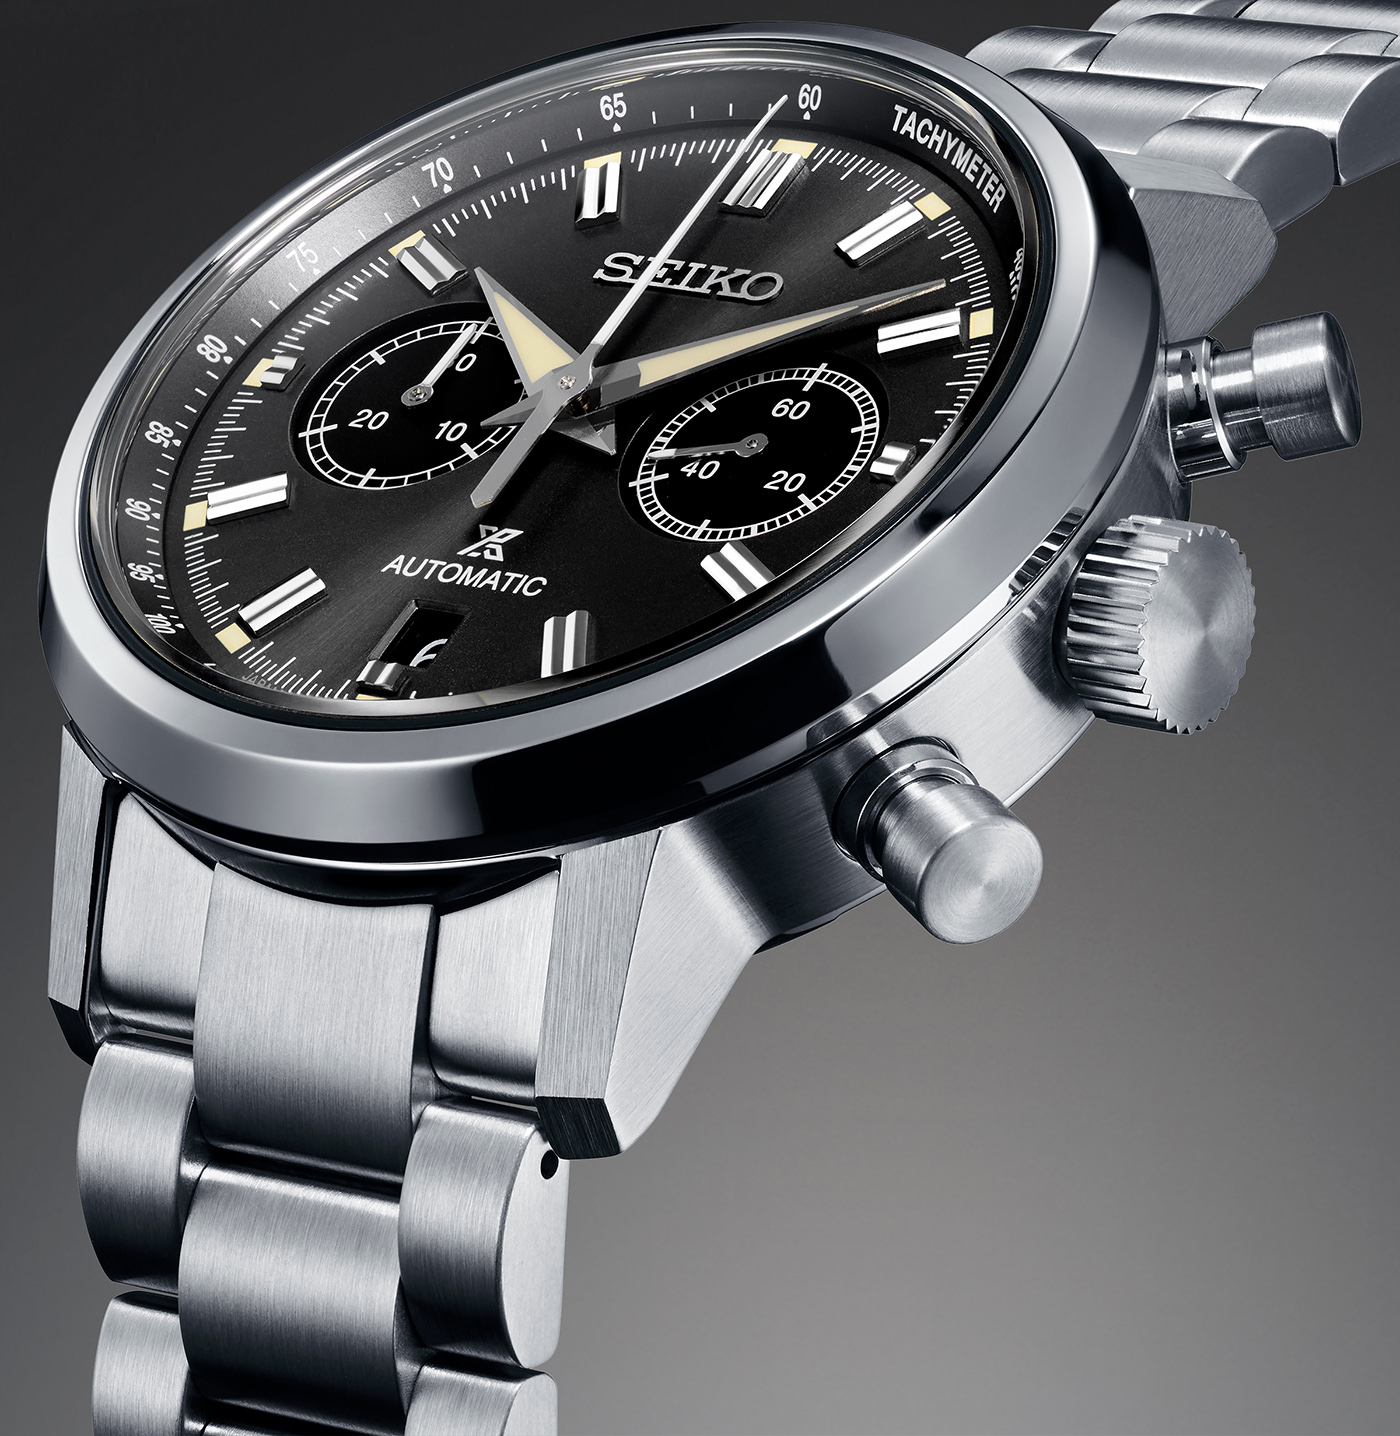 Seiko Revives Speedtimer Nameplate With New Automatic Chronograph Watches |  aBlogtoWatch